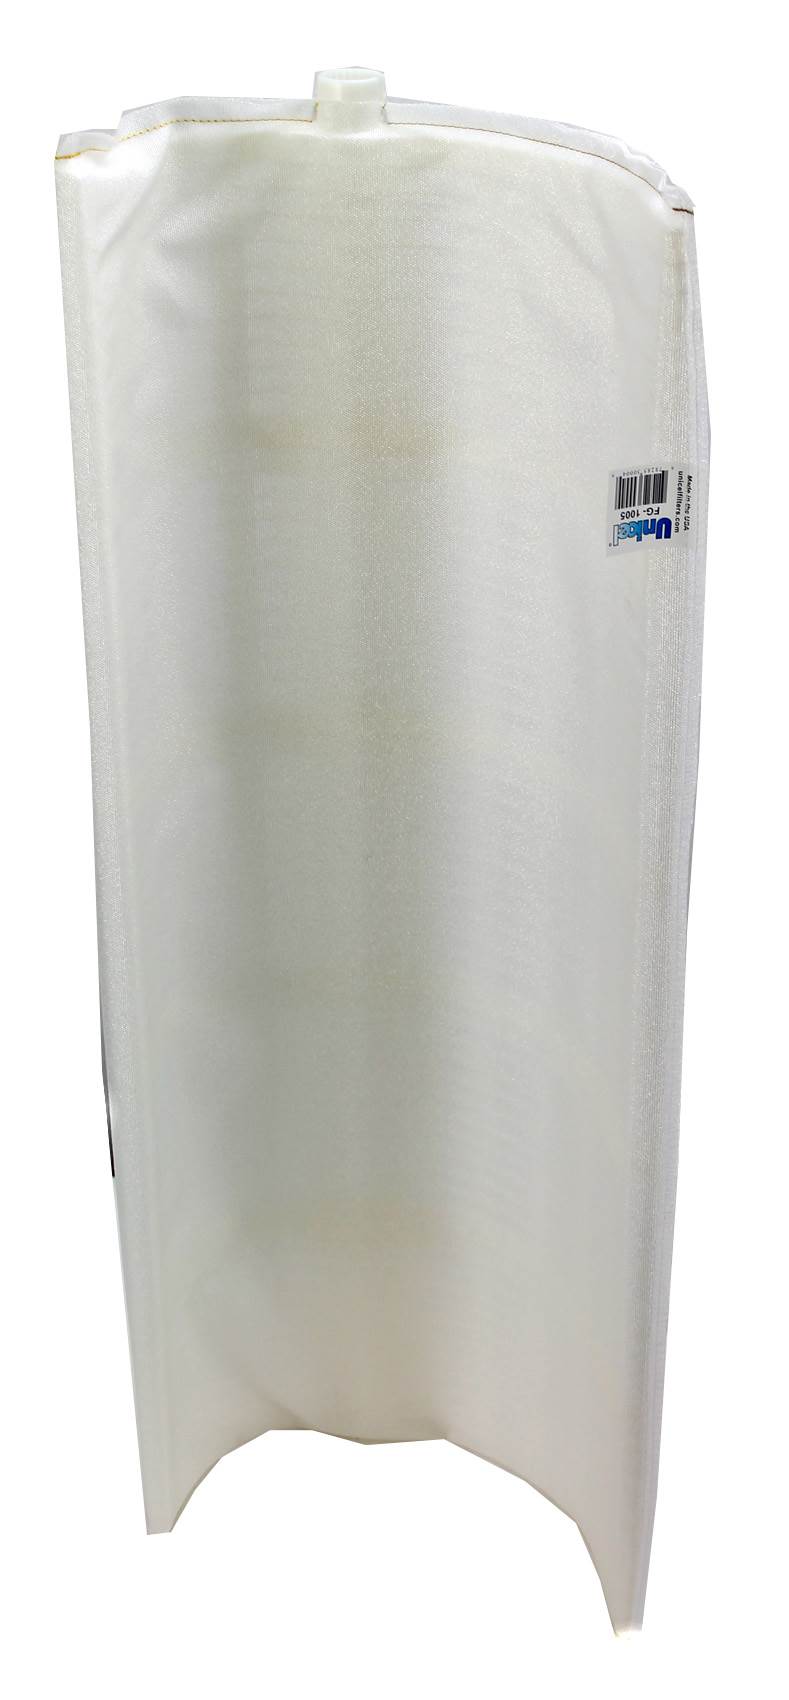 7) UNICEL FG-1005 D.E. Filters Full Grid 60 Sq Ft 30" 7 Required FG1005 FC-9350